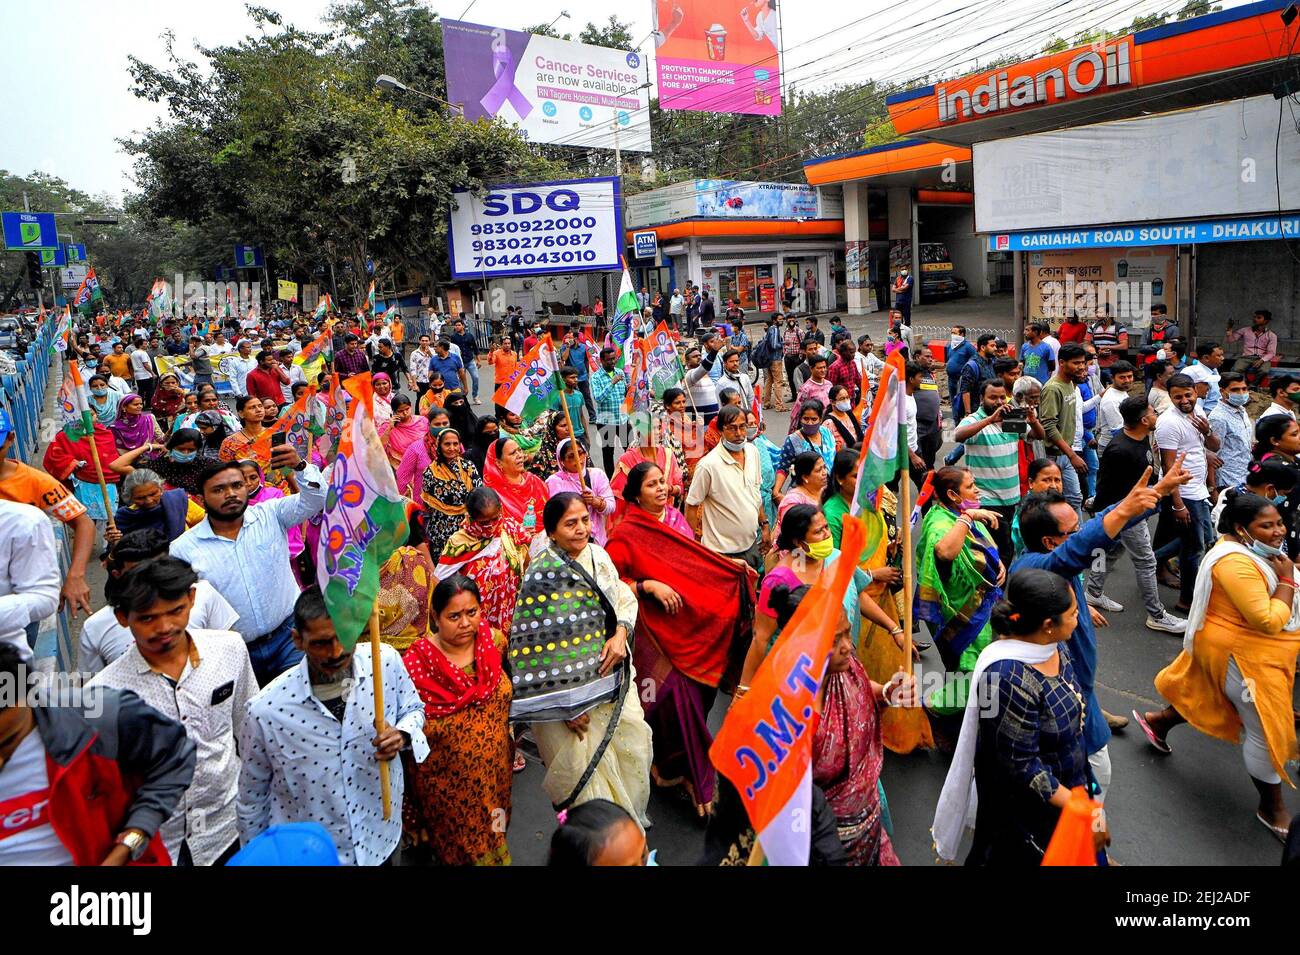 Protestors marching during the demonstration.All India Trinamool Congress protest against the regular price hike on Petrol & Diesel in front of an Indian Oil Petrol Pump. Stock Photo